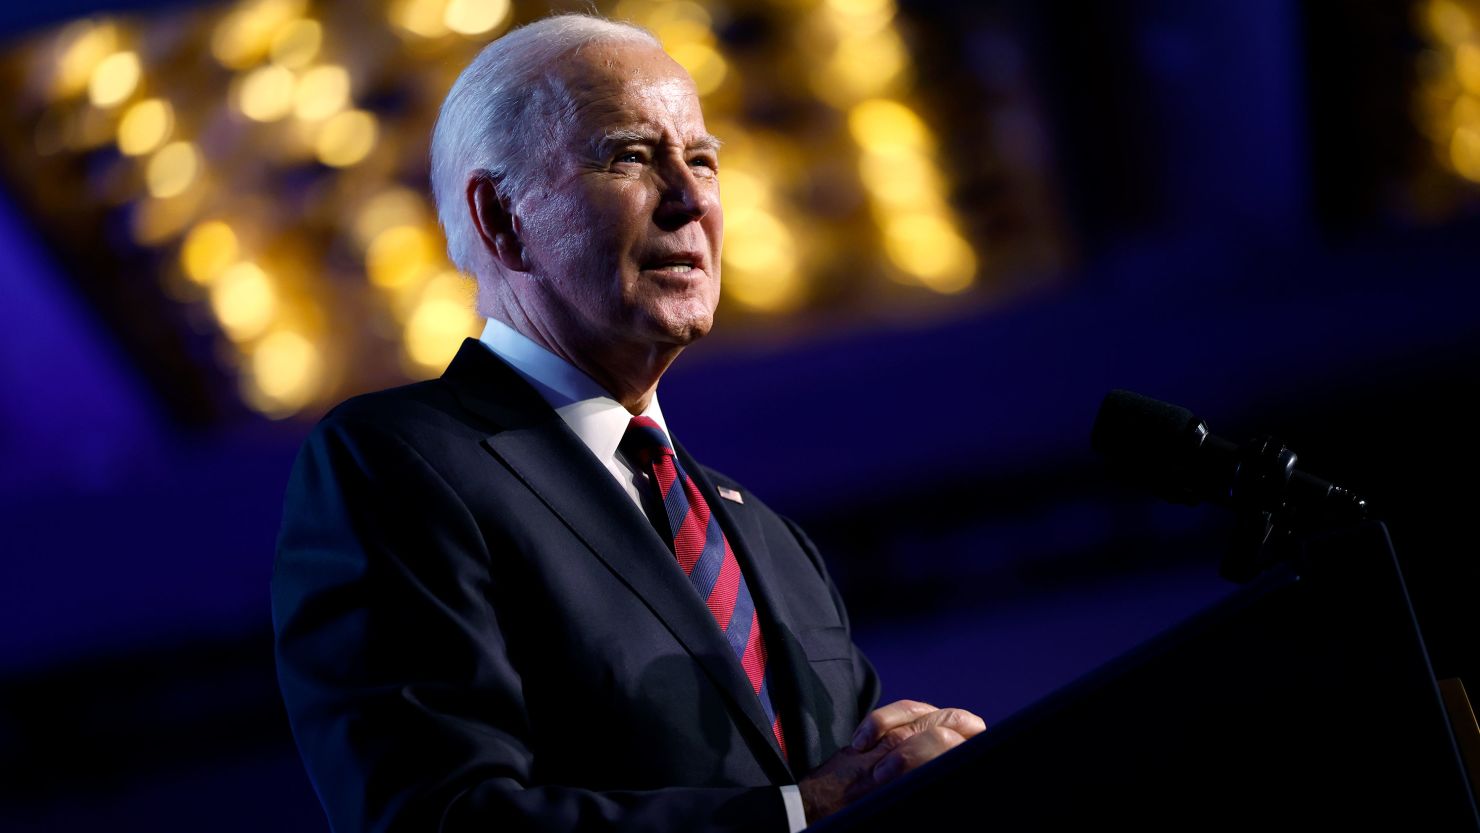 Biden spoke with ceasefire advocates as his team grapples with reality